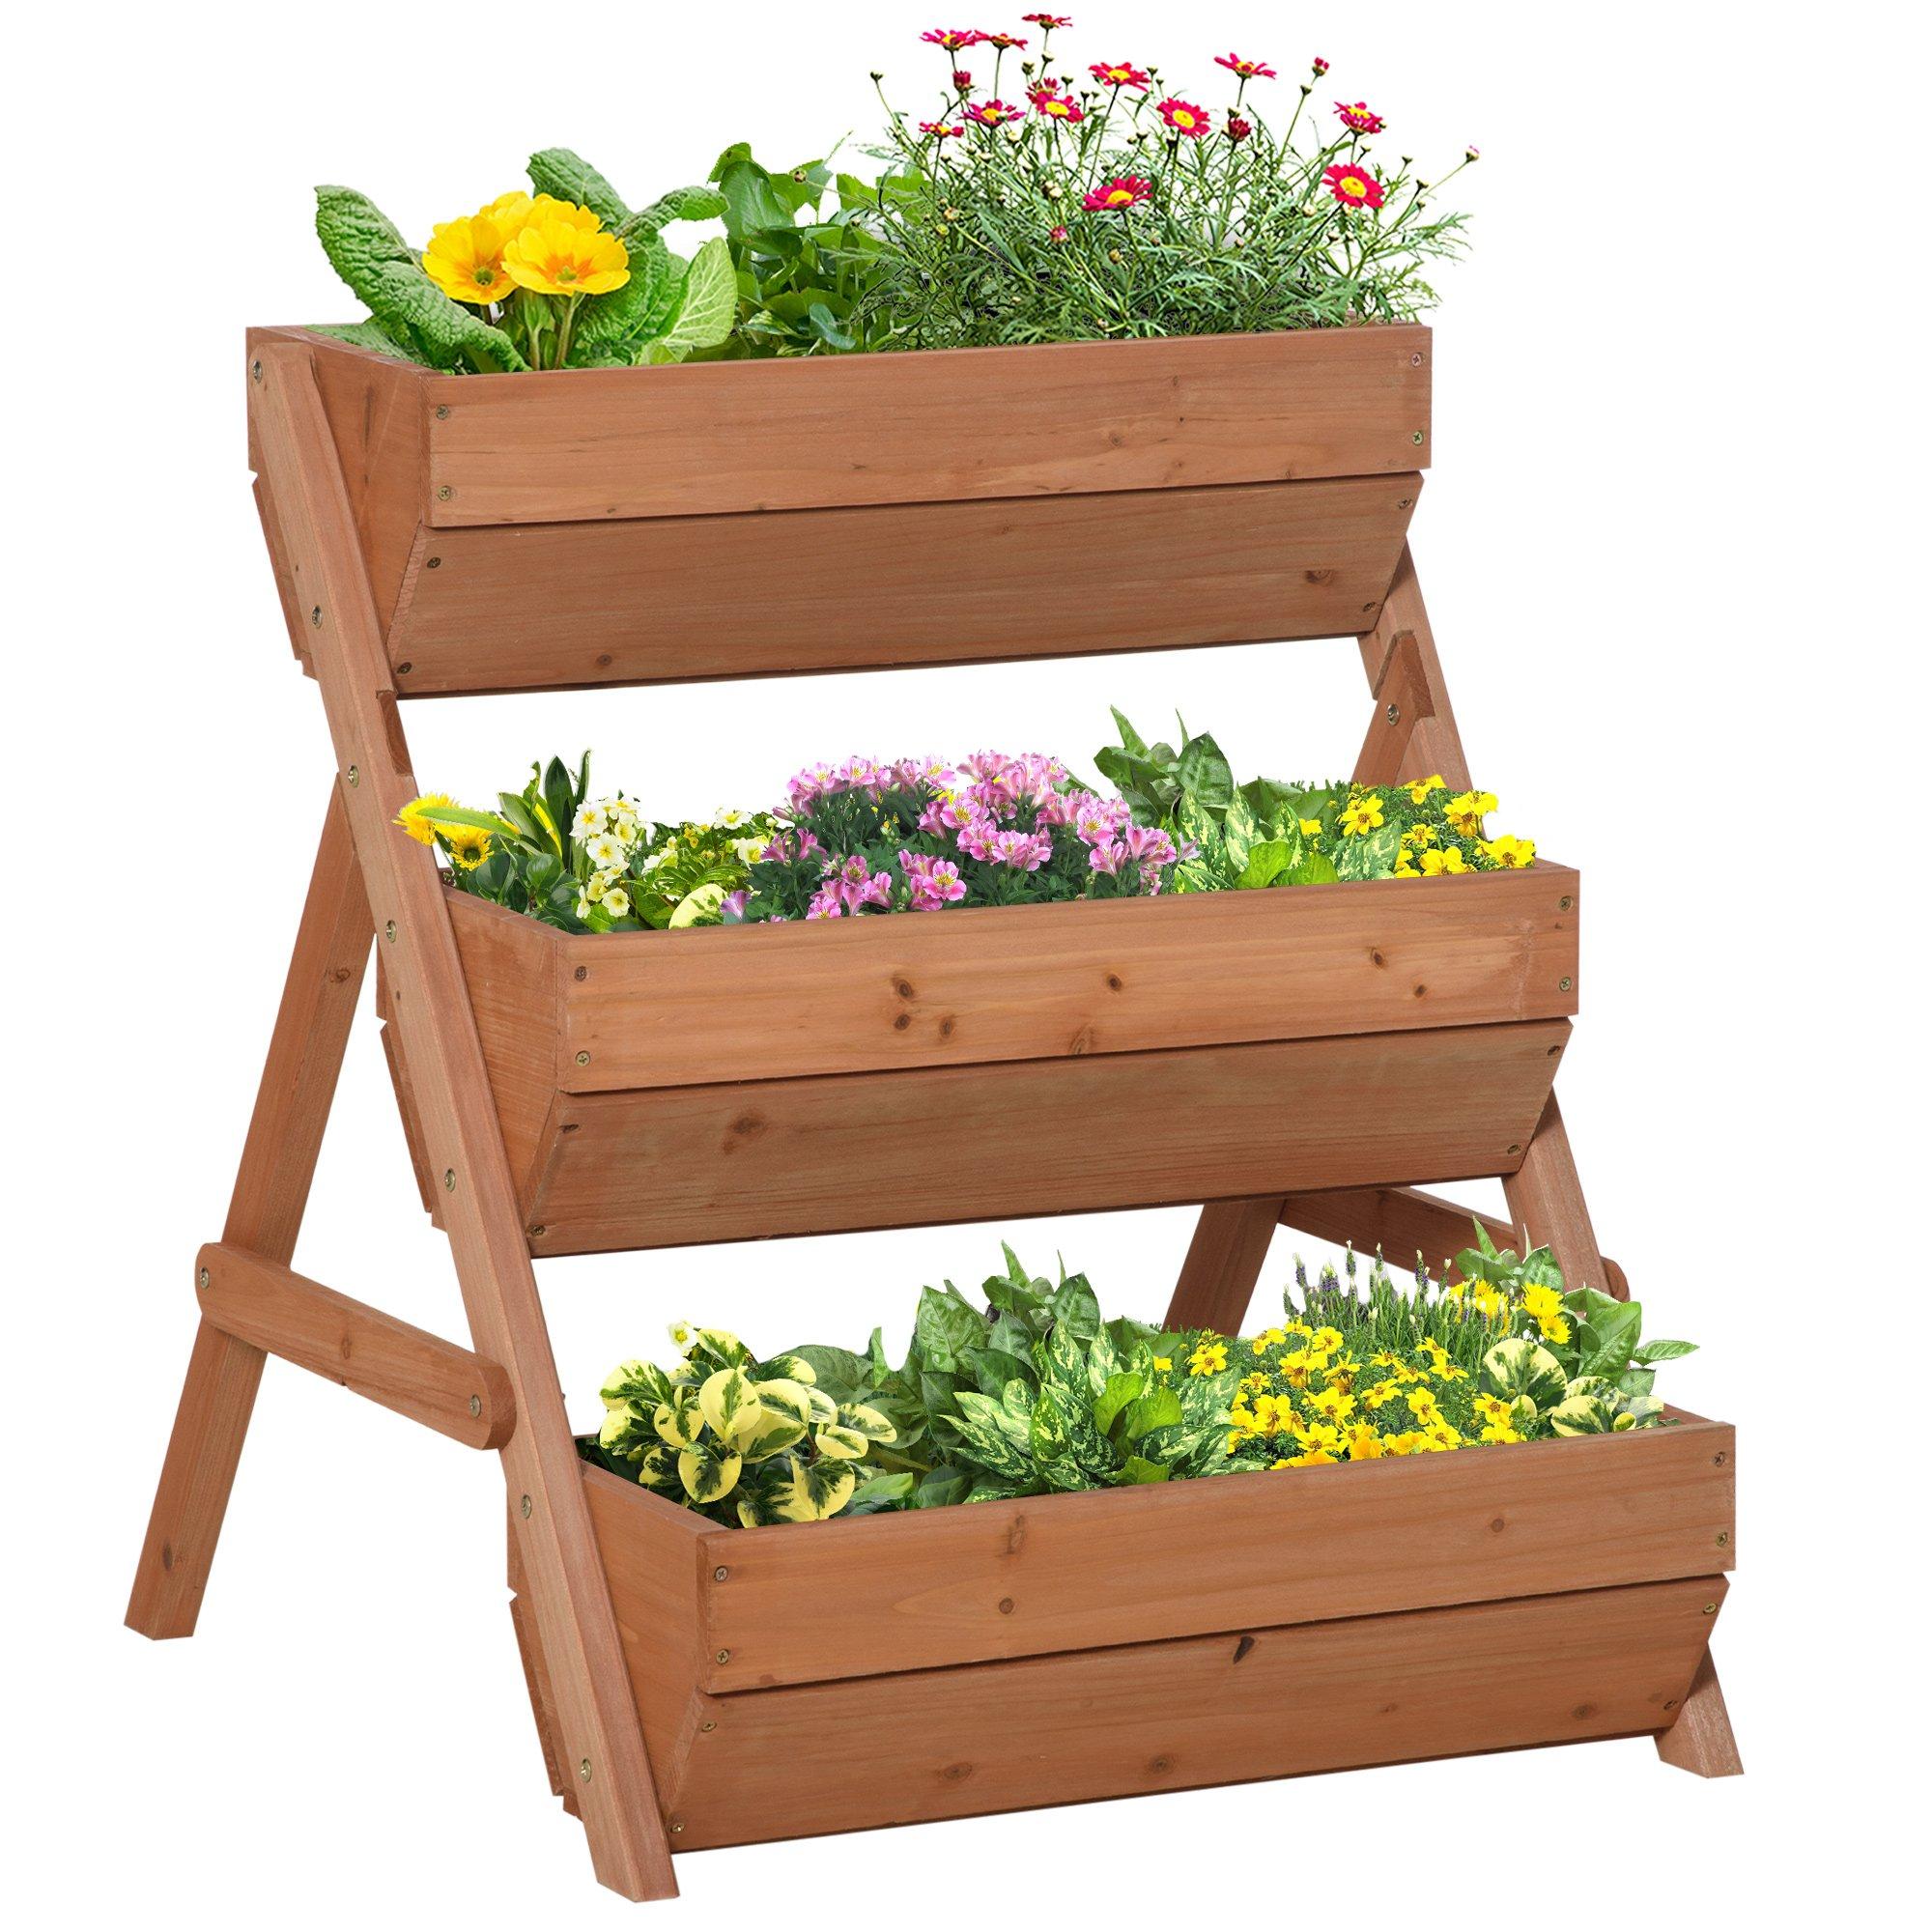 3 Tier Raised Garden Bed Wooden Elevated Planter Grow Box for Flower Herb